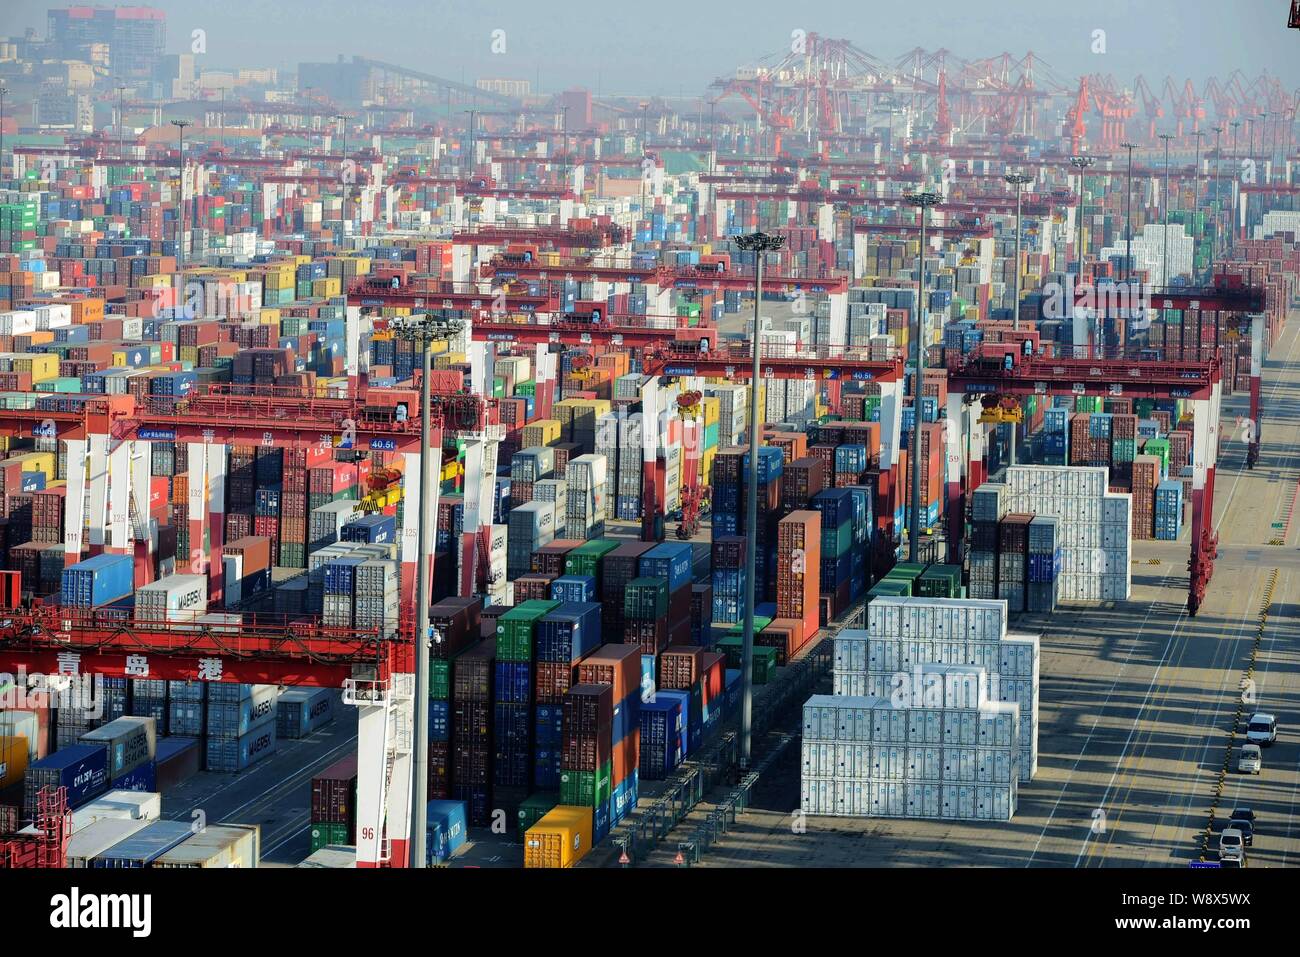 Stacks of Containers are seen at the Port of Qingdao in Qingdao city, east China's Shandong province, 8 December 2014.   China's imports shrank unexpe Stock Photo